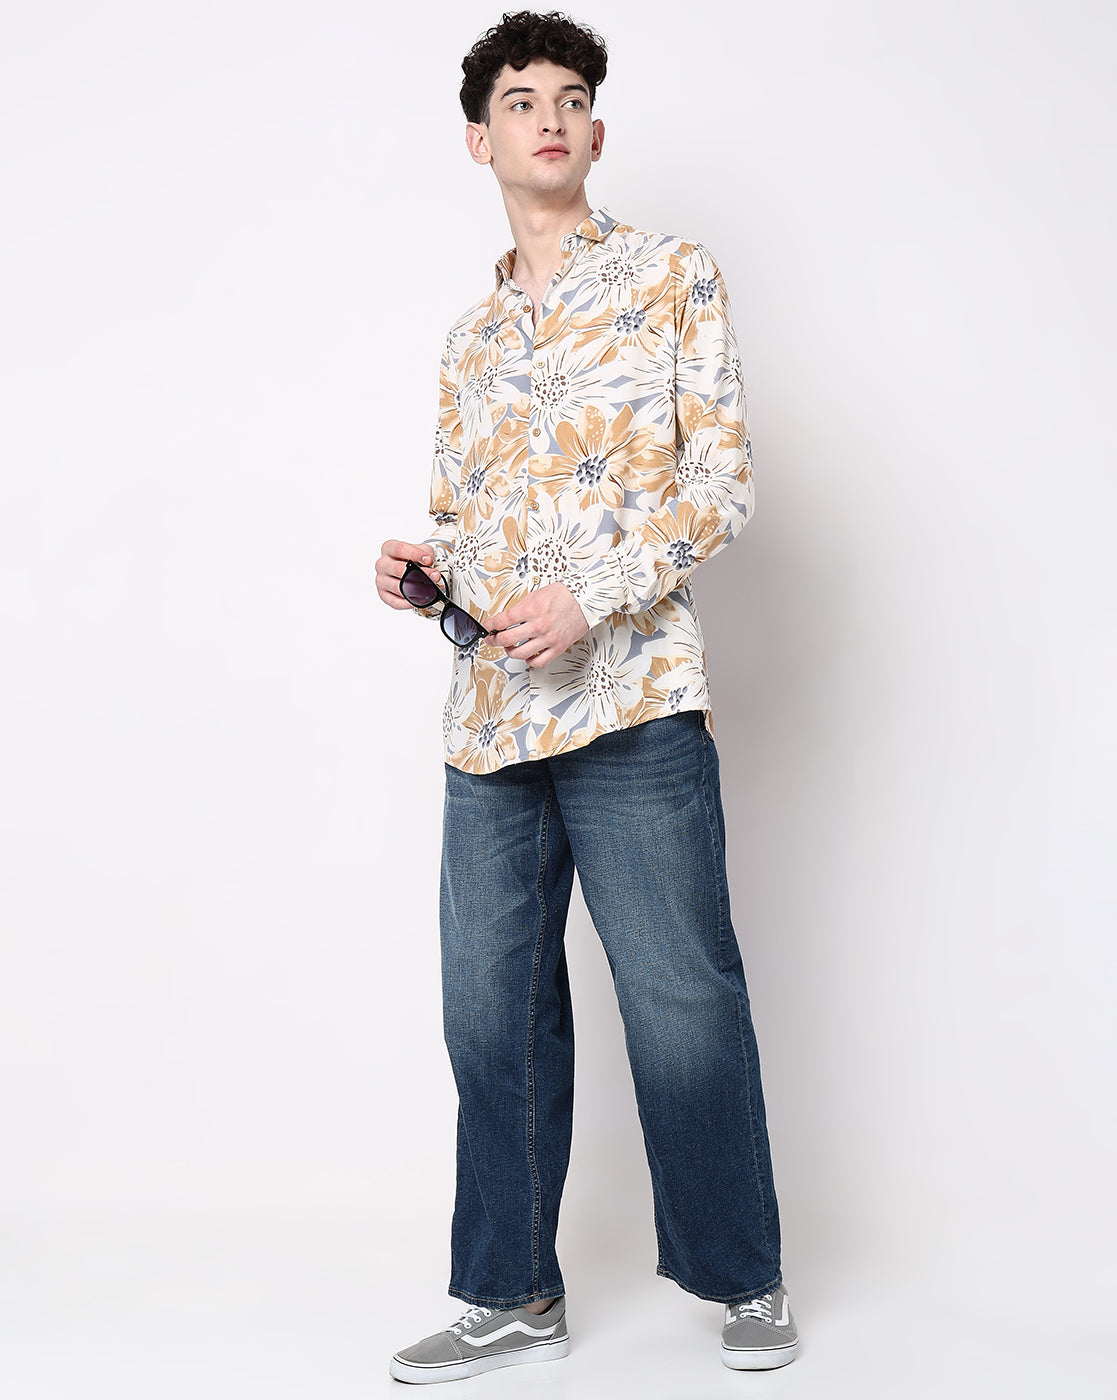 Multicolored Floral Print Rayon Full Sleeve Shirt